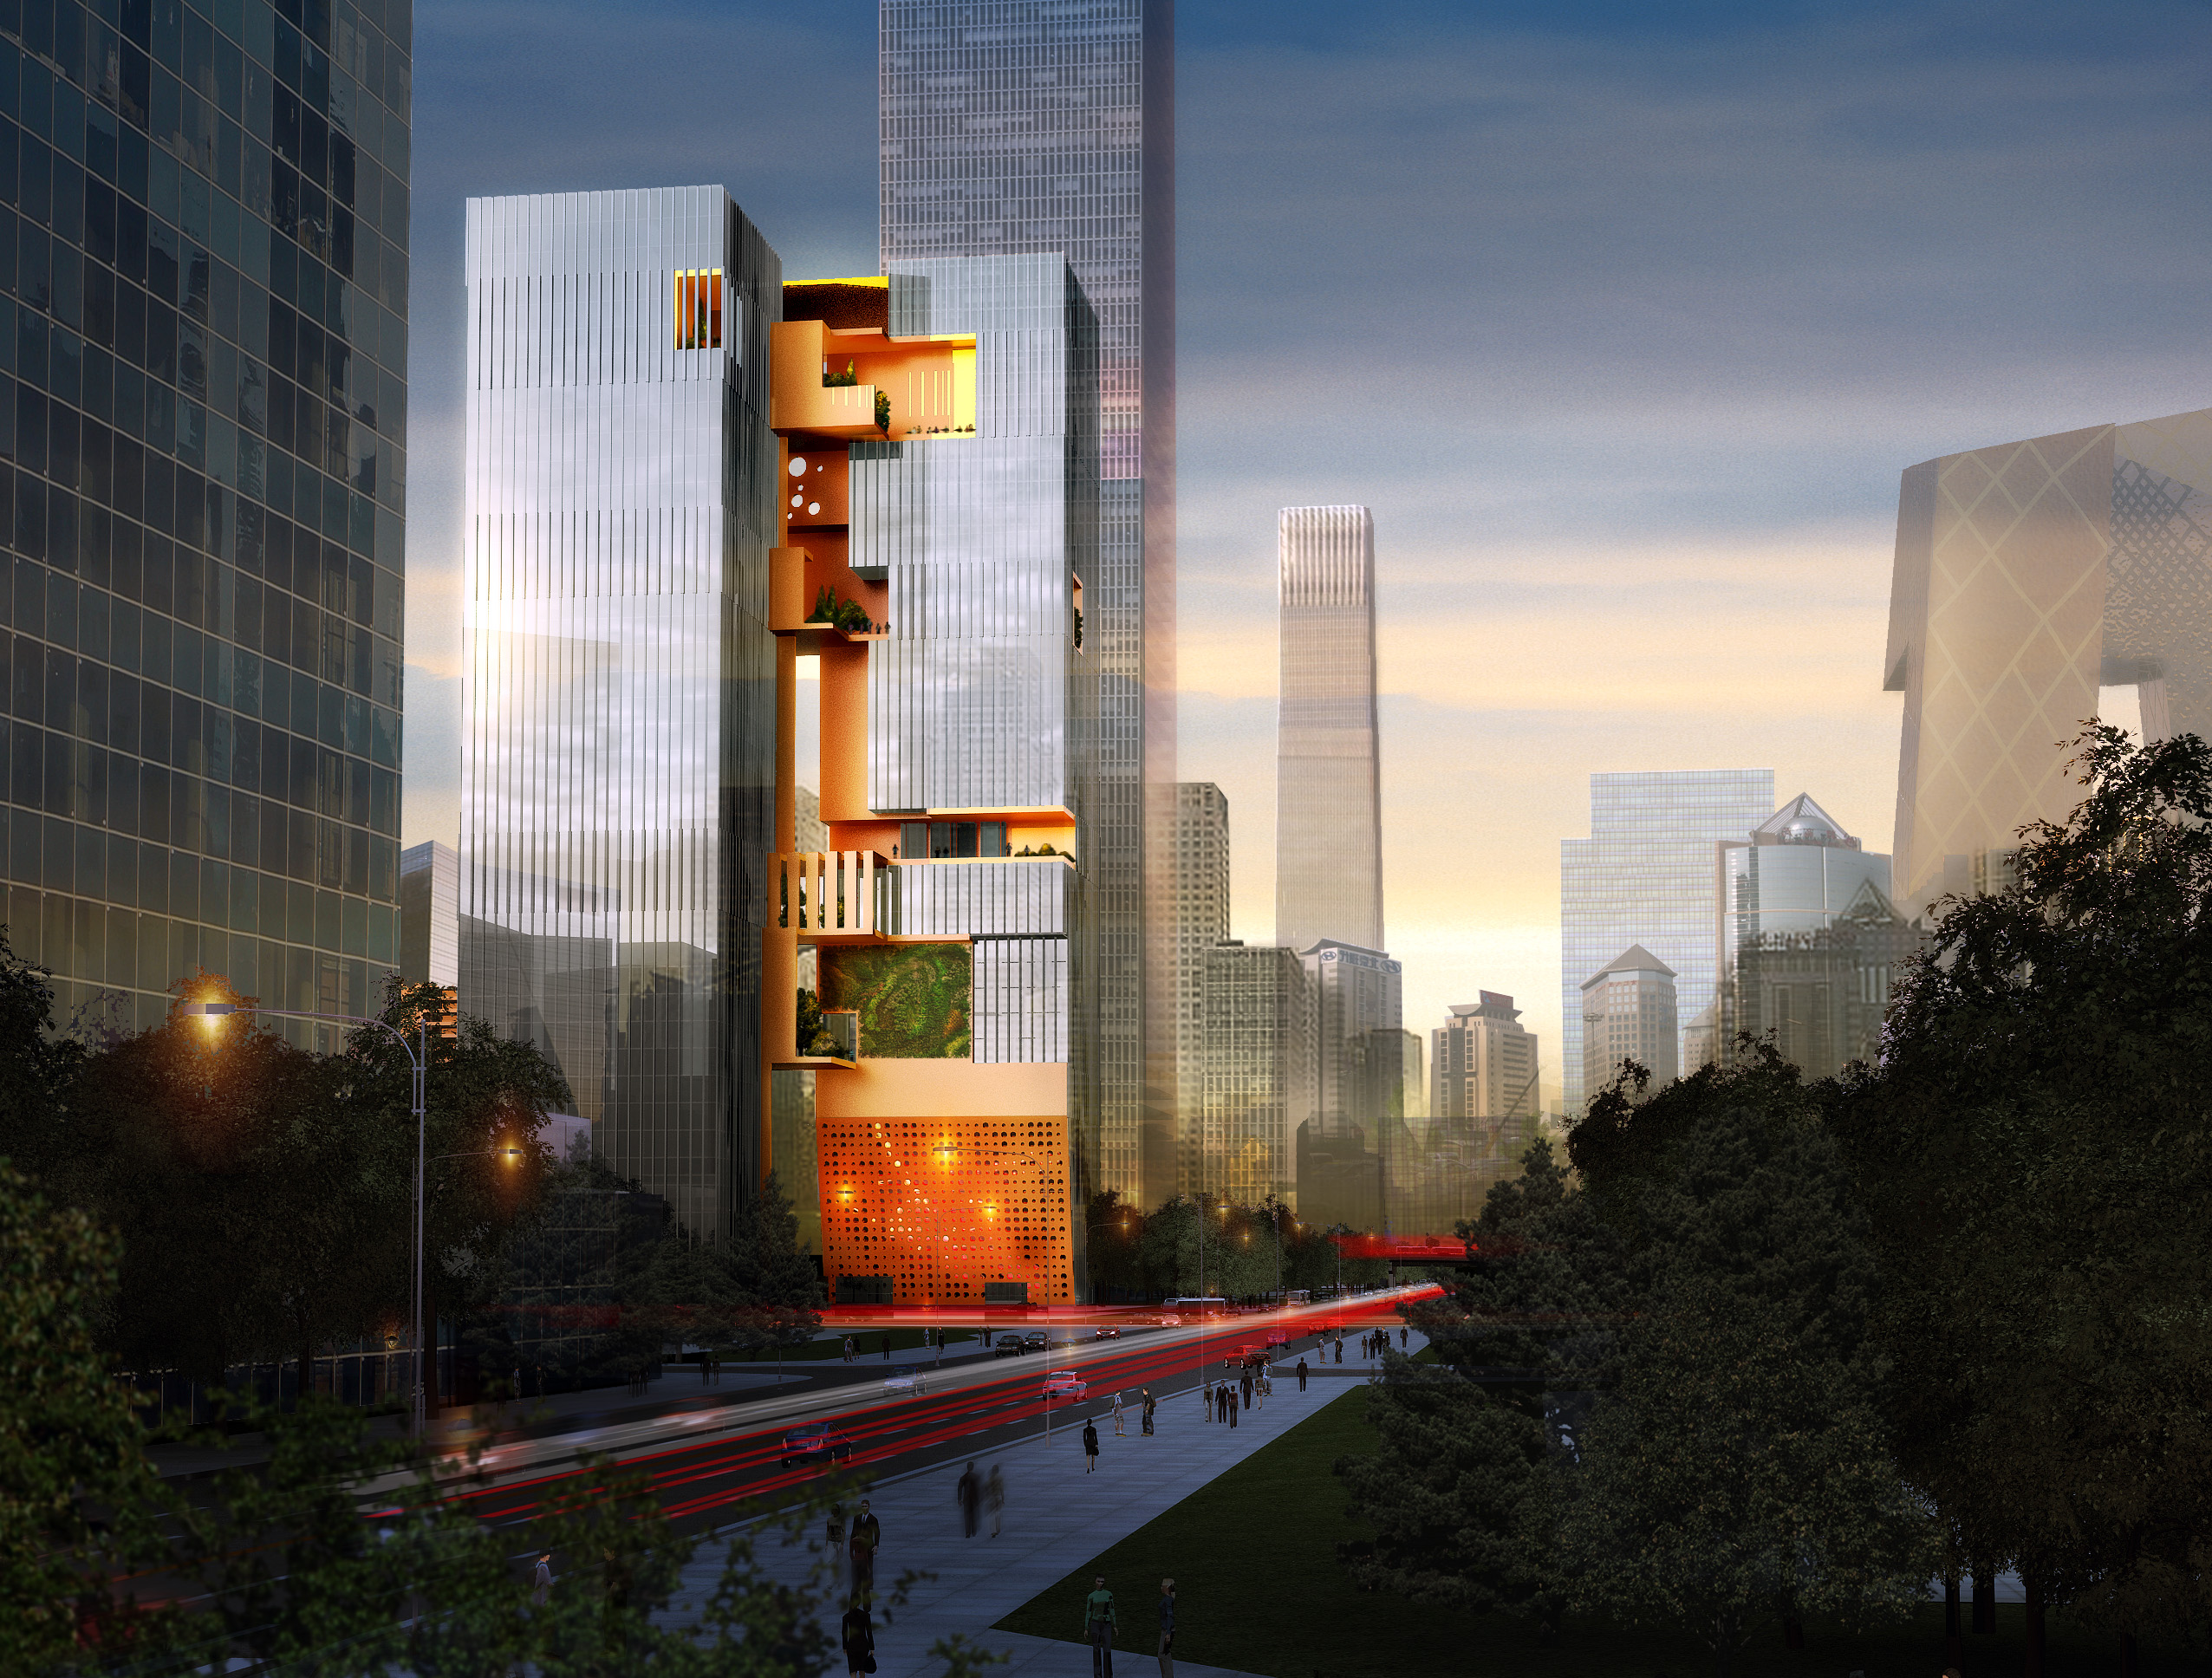 spatial practice architecture office Los Angeles Hong Kong ecospine twin towers cbd beijing china sunset street view